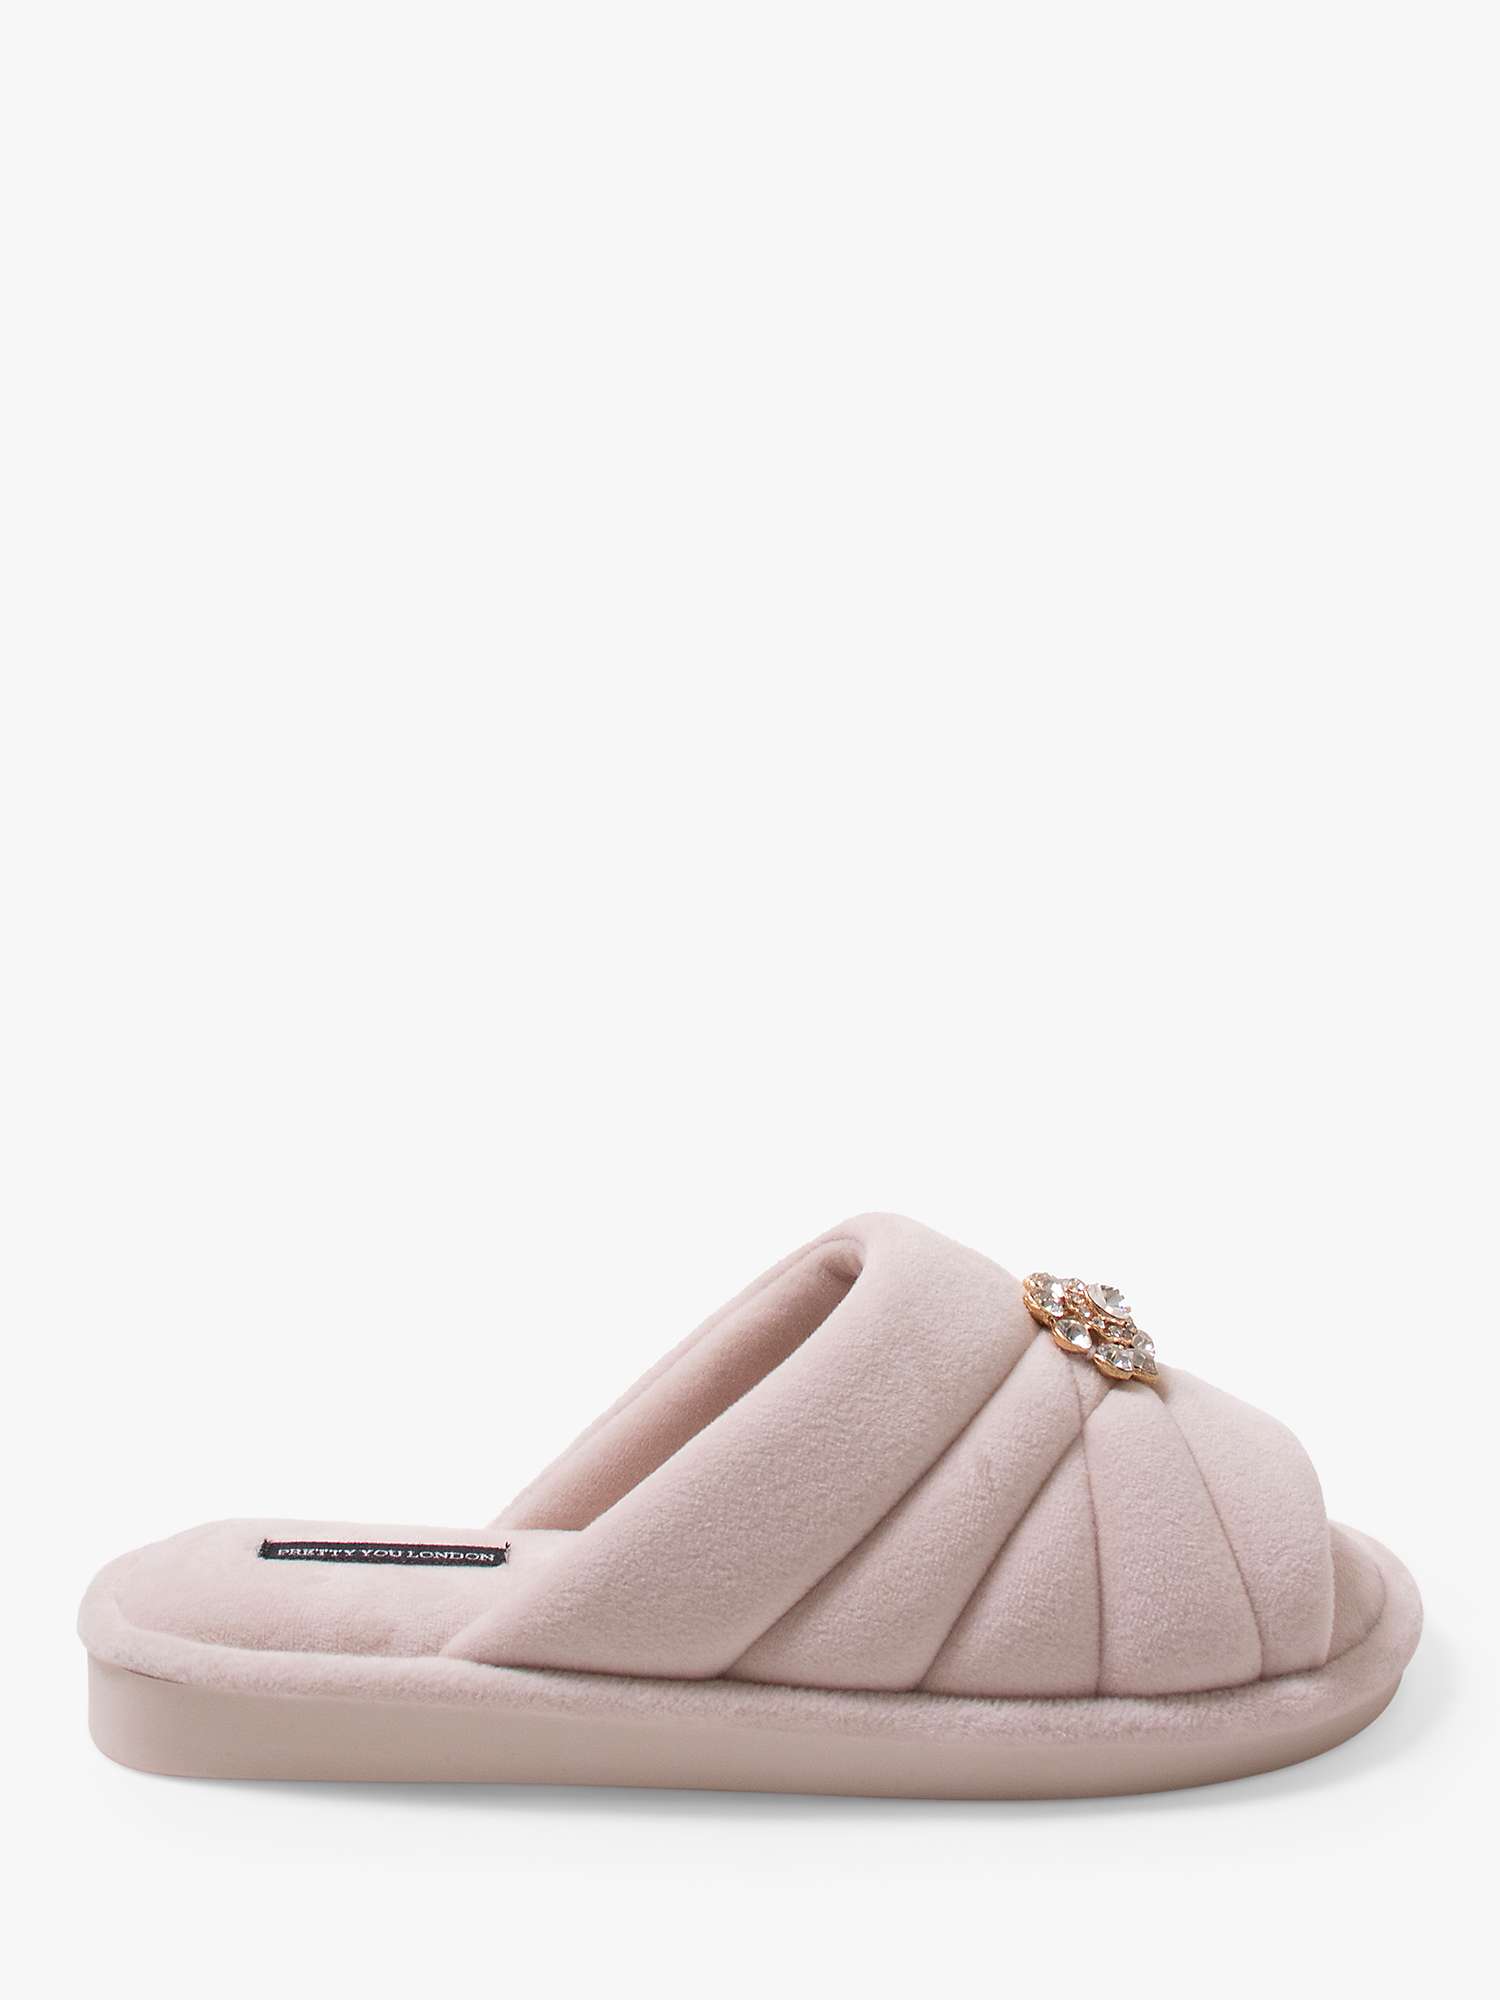 Buy Pretty You London Faye Crystal Brooch Slippers Online at johnlewis.com